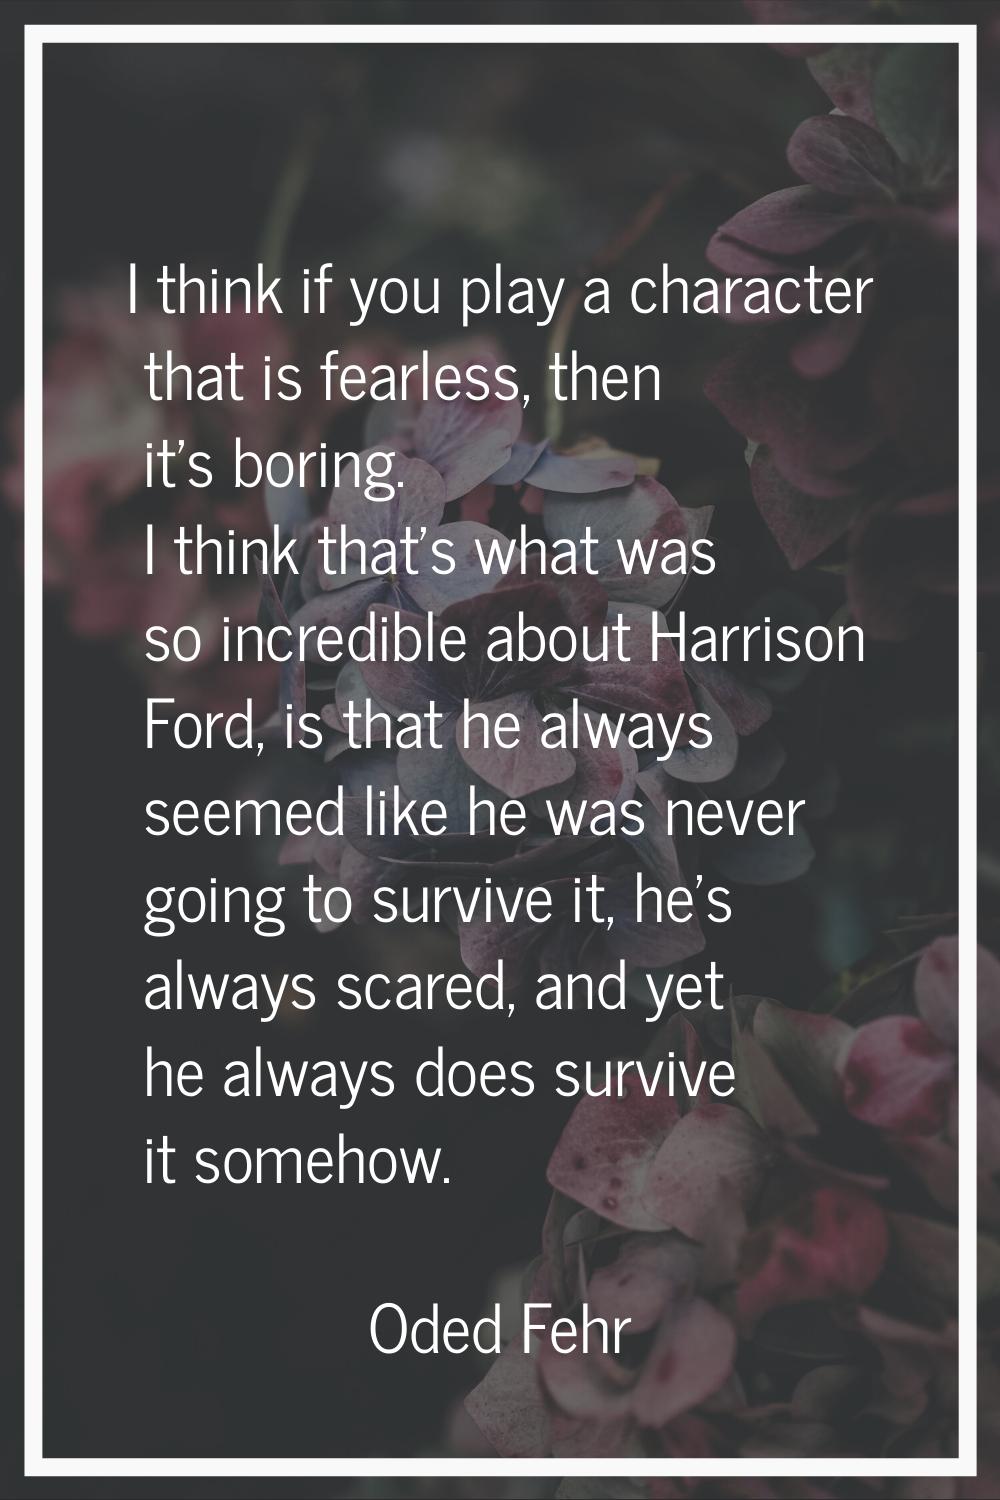 I think if you play a character that is fearless, then it's boring. I think that's what was so incr